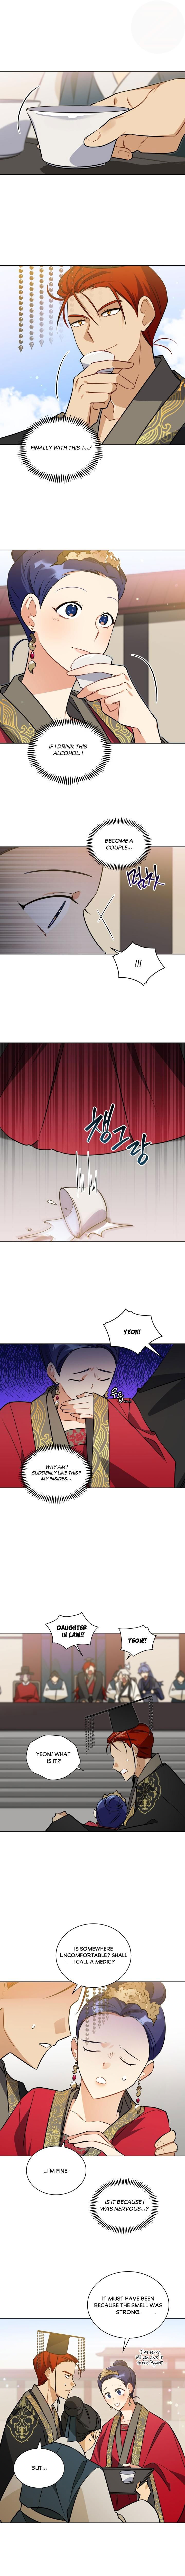 Beast with Flowers Chapter 88 page 5